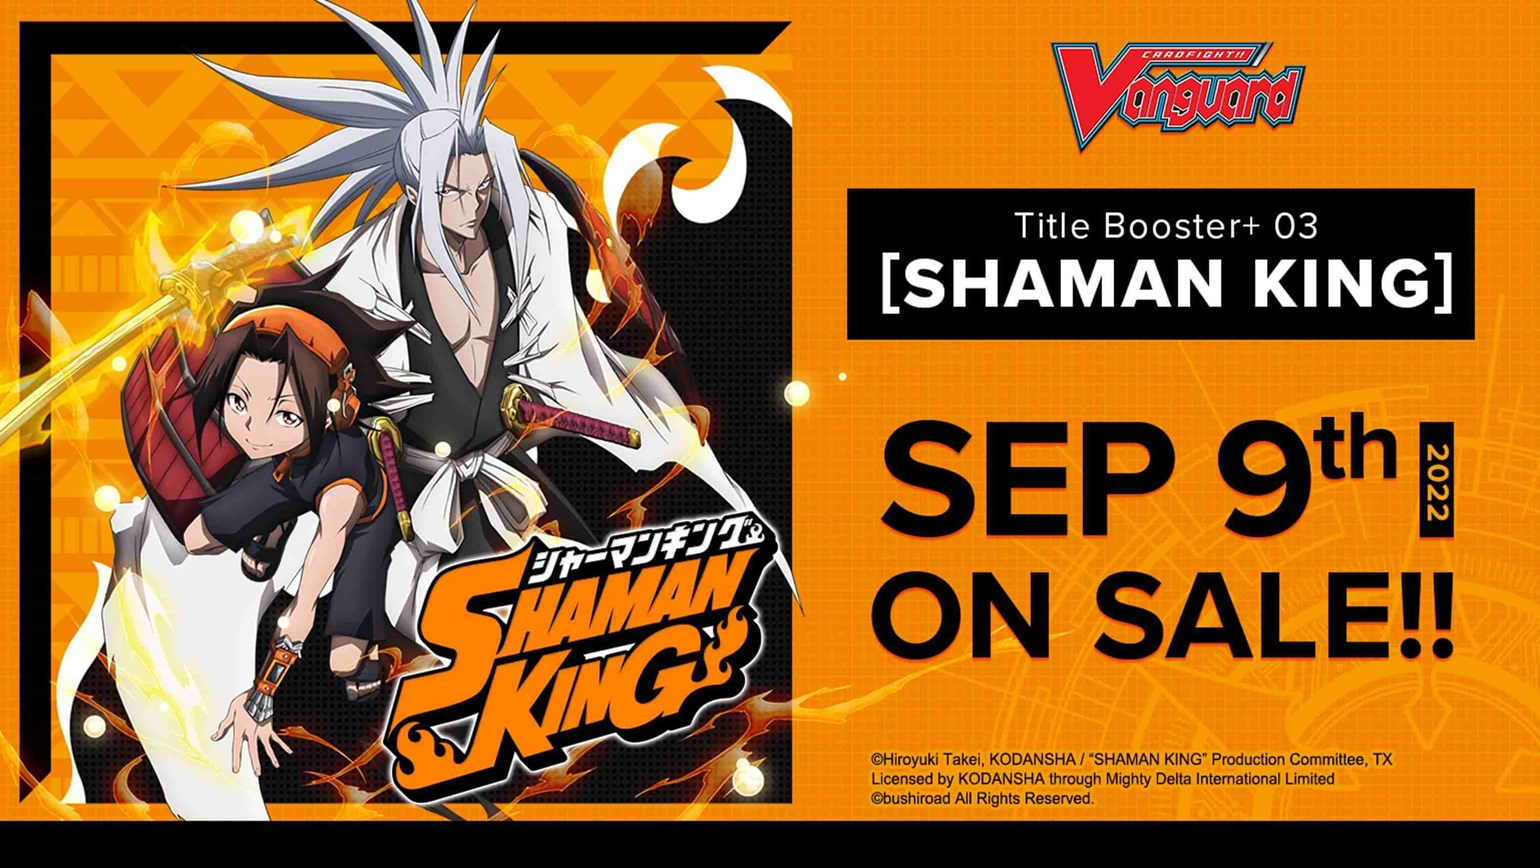 SHAMAN KING: New English Edition Cardfight!! Vanguard Title Trial Deck and Title Booster+ 03 “SHAMAN KING”